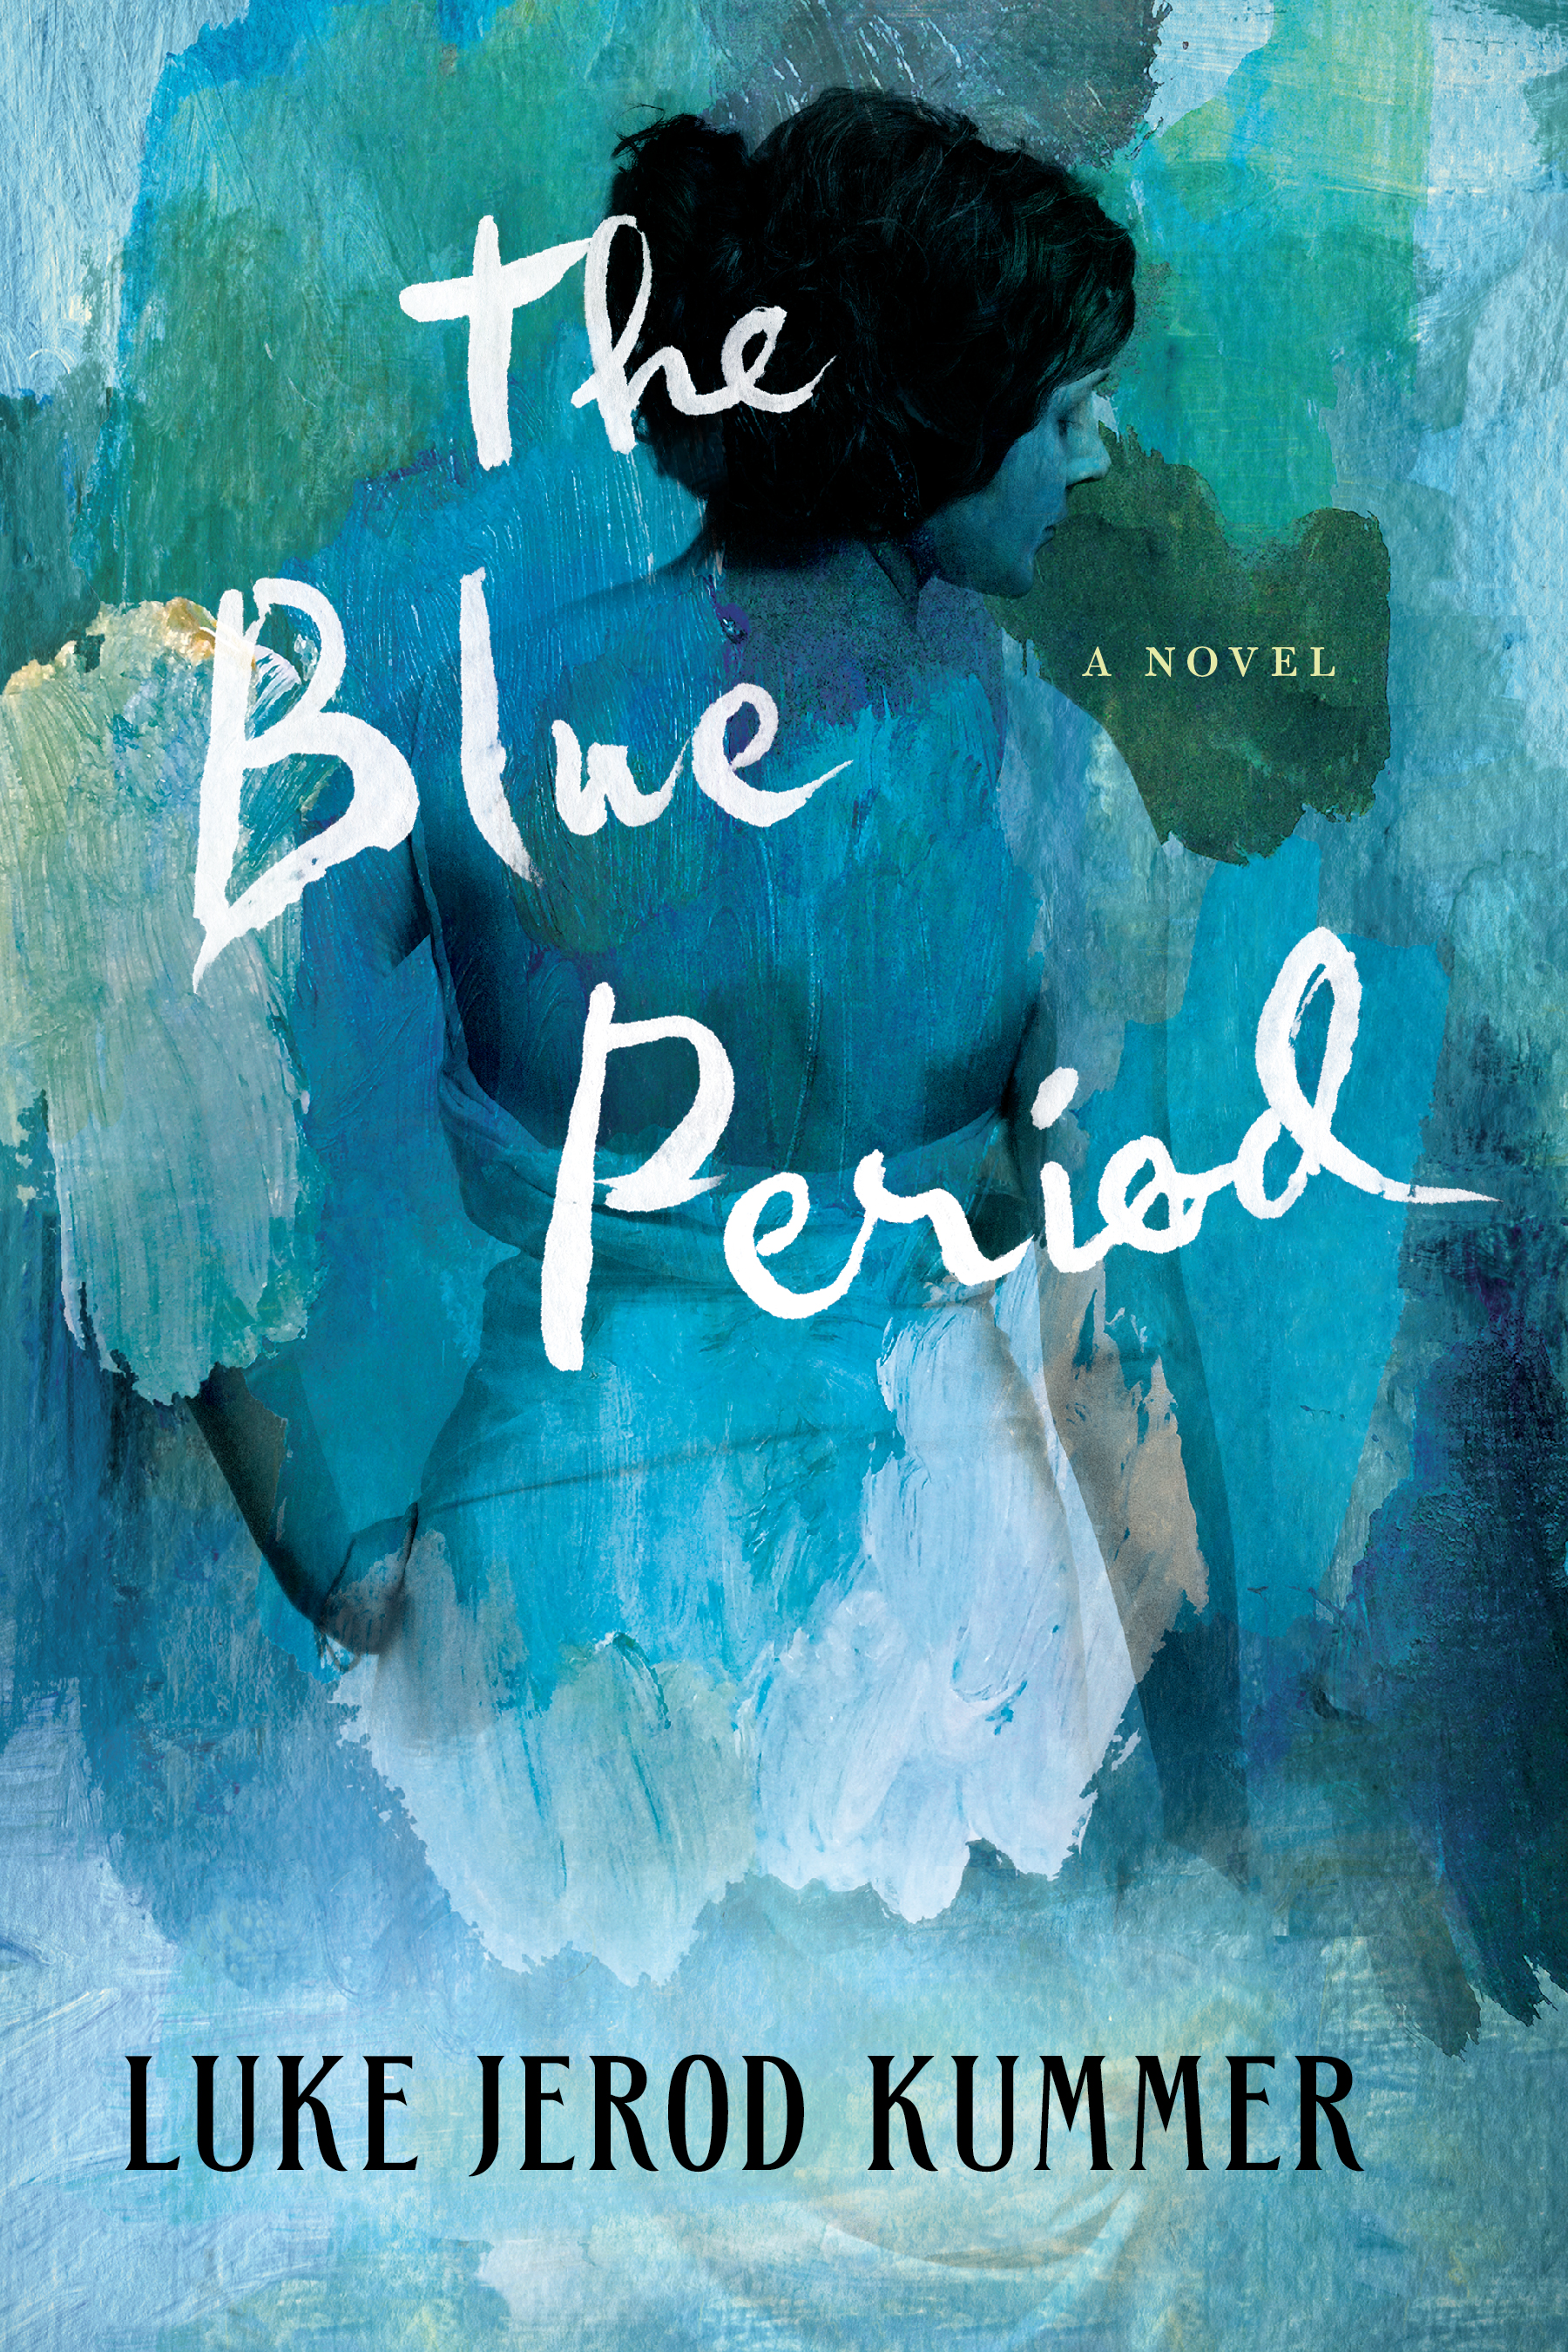 Book Launch: The Blue Period by Luke Jerod Kummer in conversation with Nellie Hermann